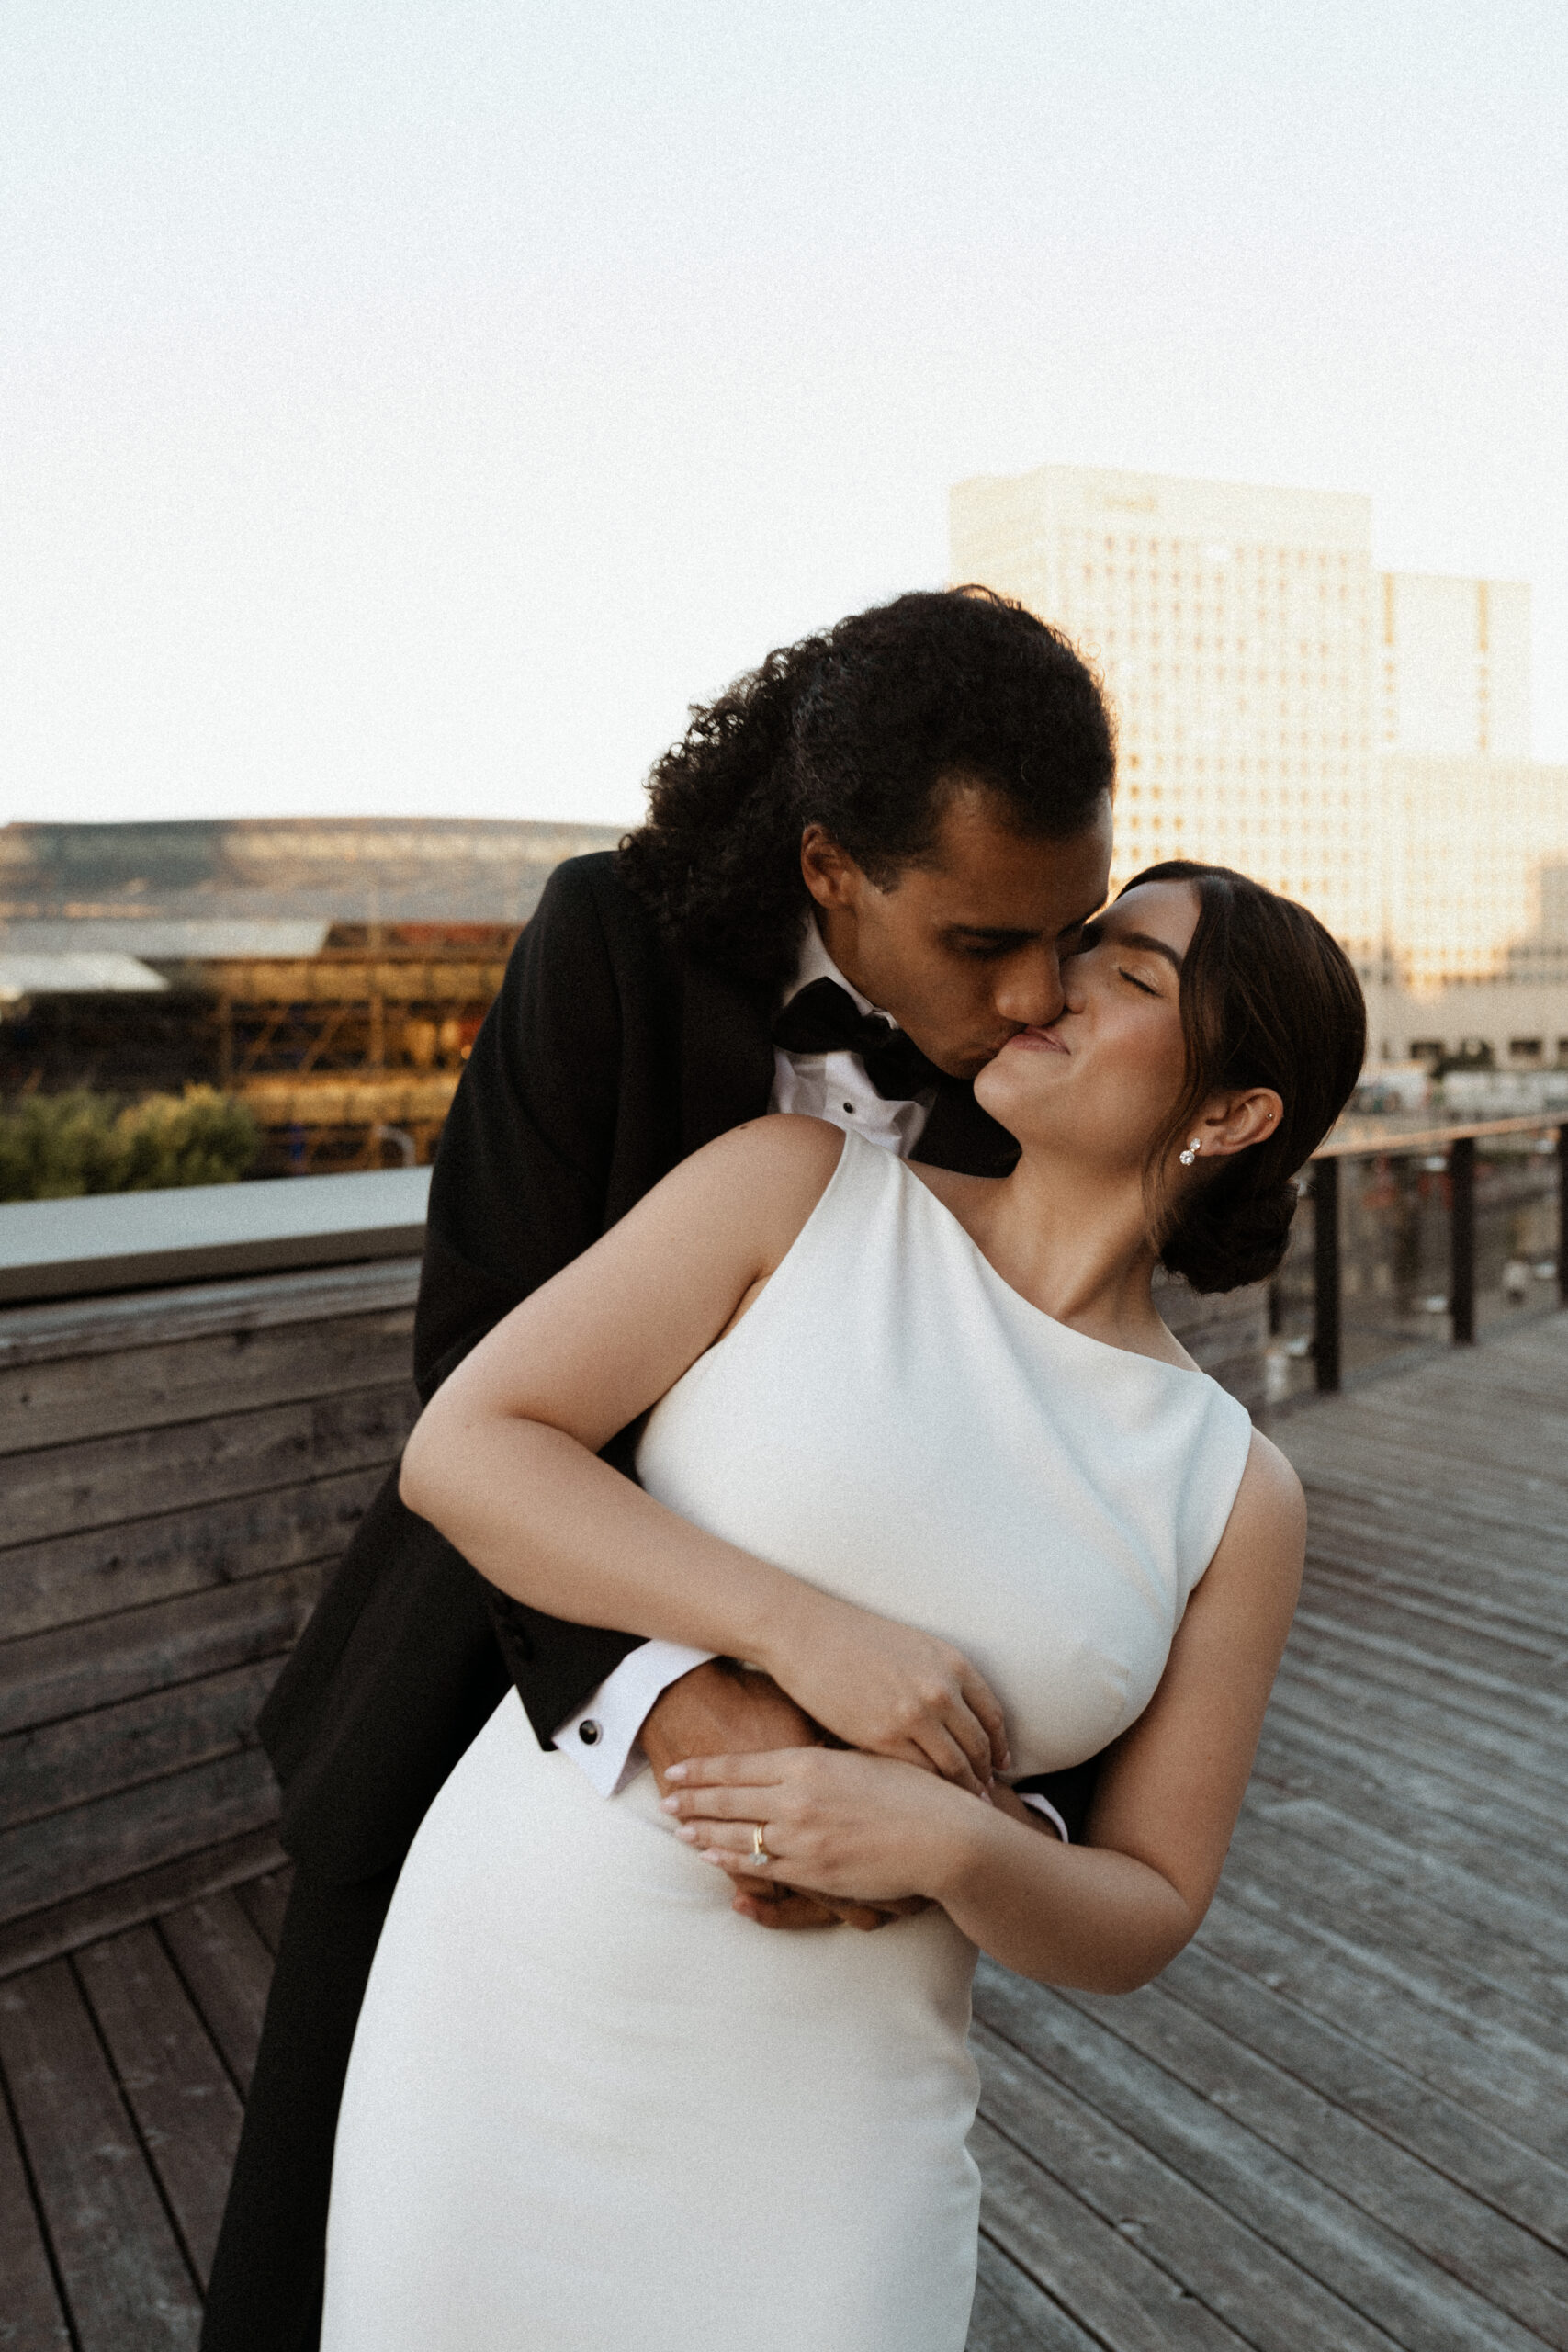 Drenched in Gold: Zeba and Amir's Enchanting Golden Hour Portraits - Toronto Wedding Photography